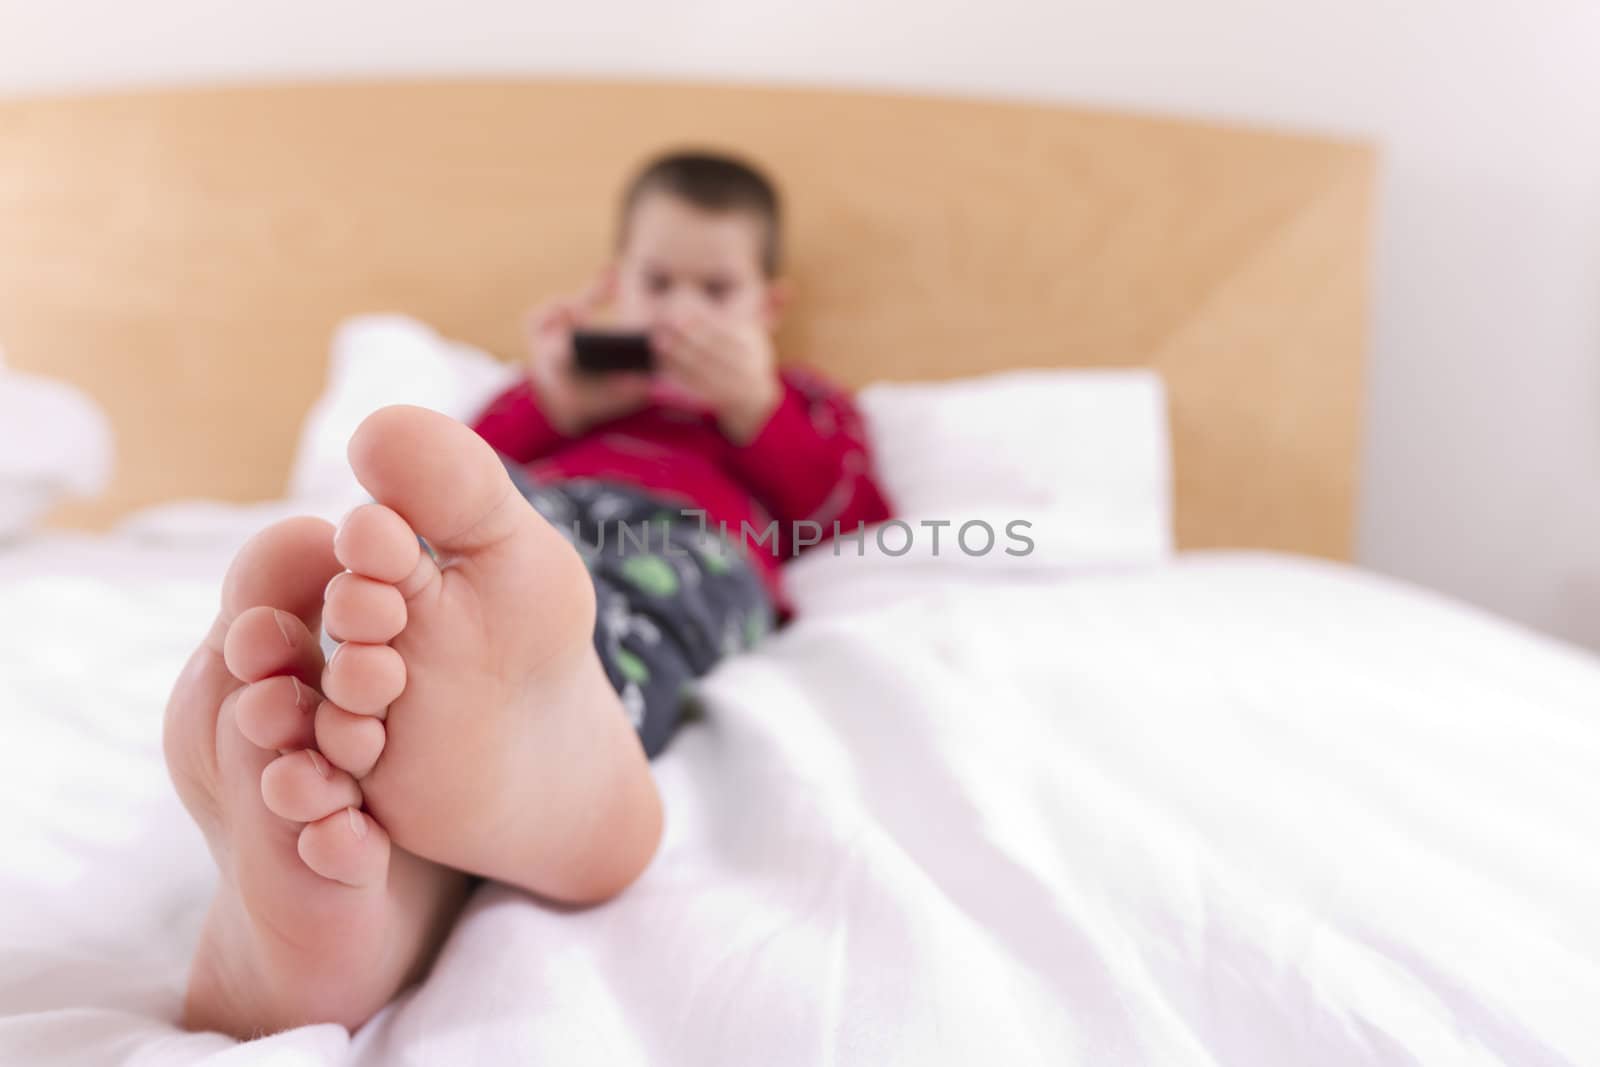 A kid enjoying sunday morning texting with his phone.